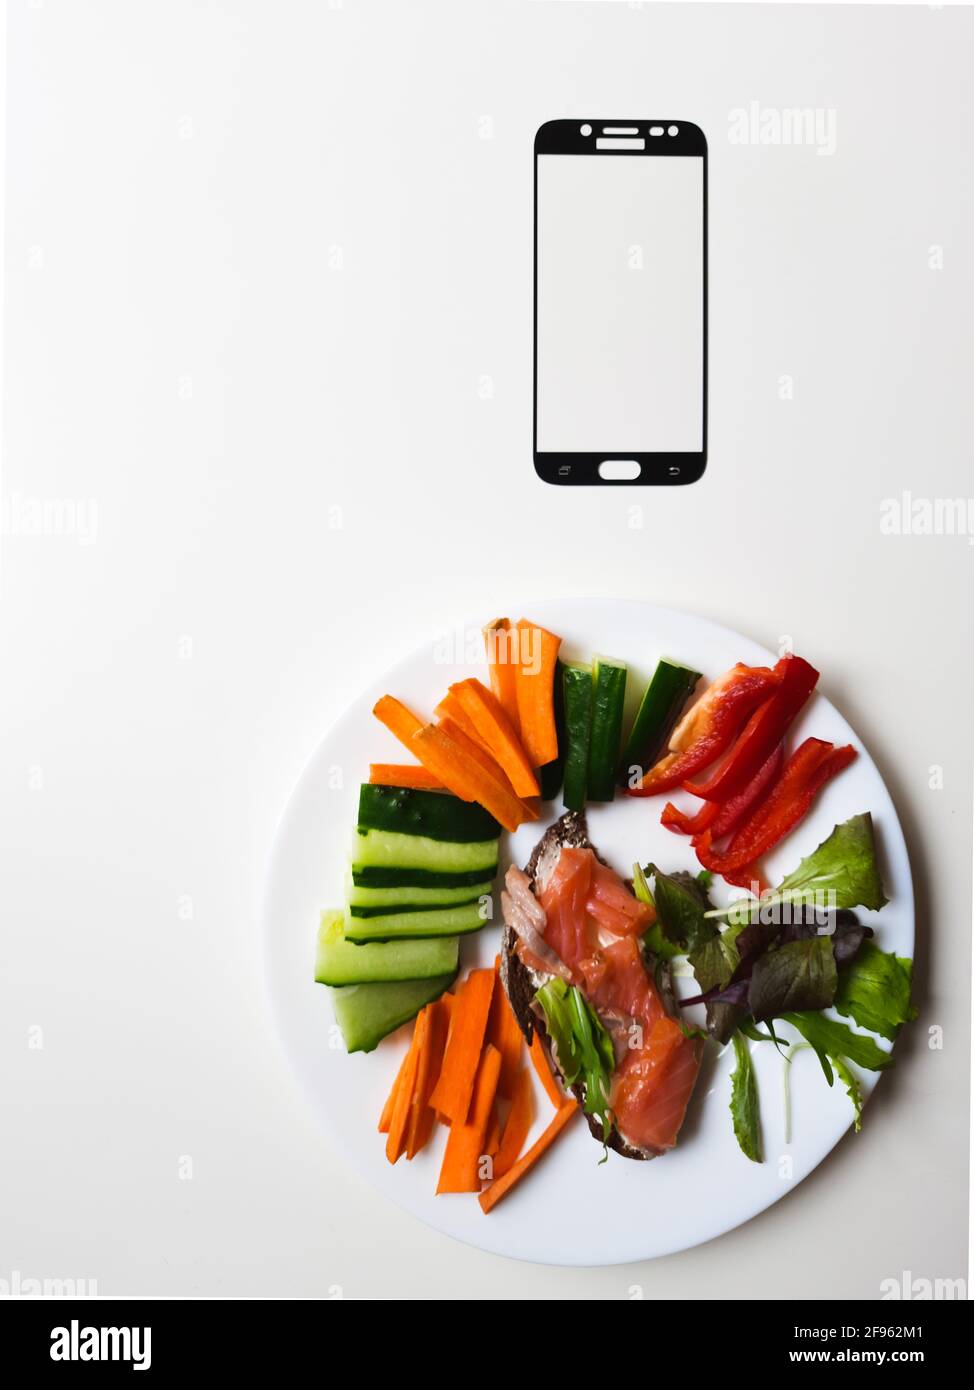 smartphone frame & white plate with vegetables & salmon on white table Stock Photo